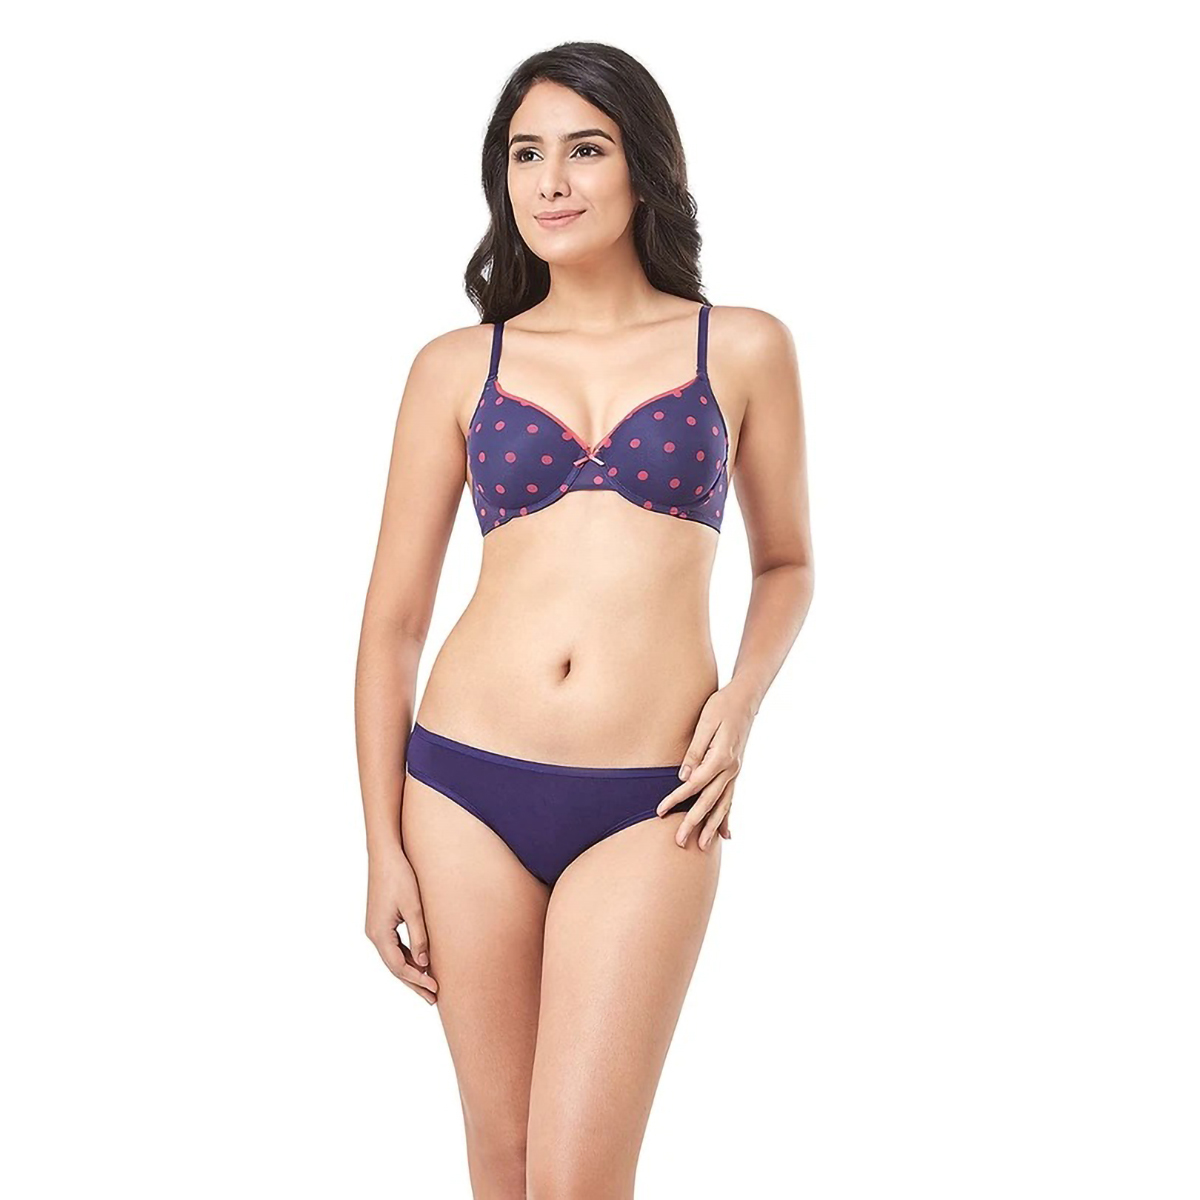 Amante Everyday Bae Full Cover Underwired Bra-Eclipse-C Cup